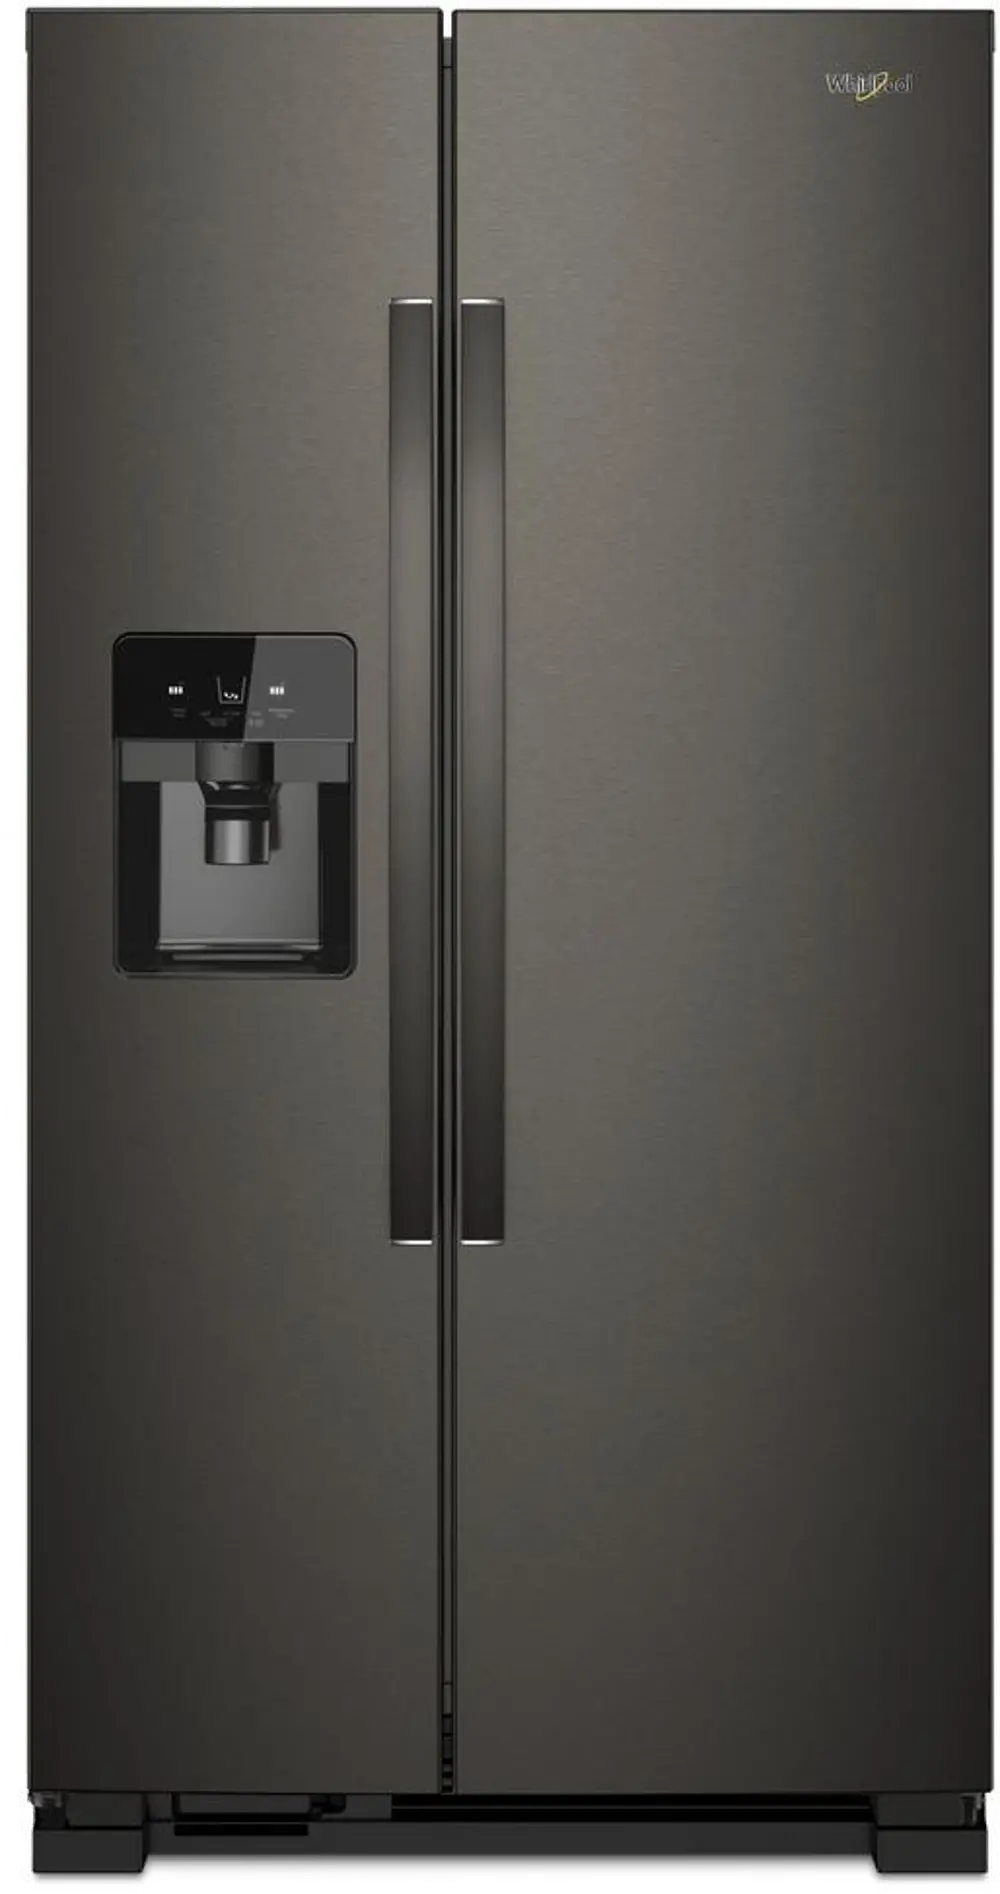 WRS321SDHV Whirlpool 21.4 cu ft Side by Side Refrigerator - 33 W Black Stainless Steel-1